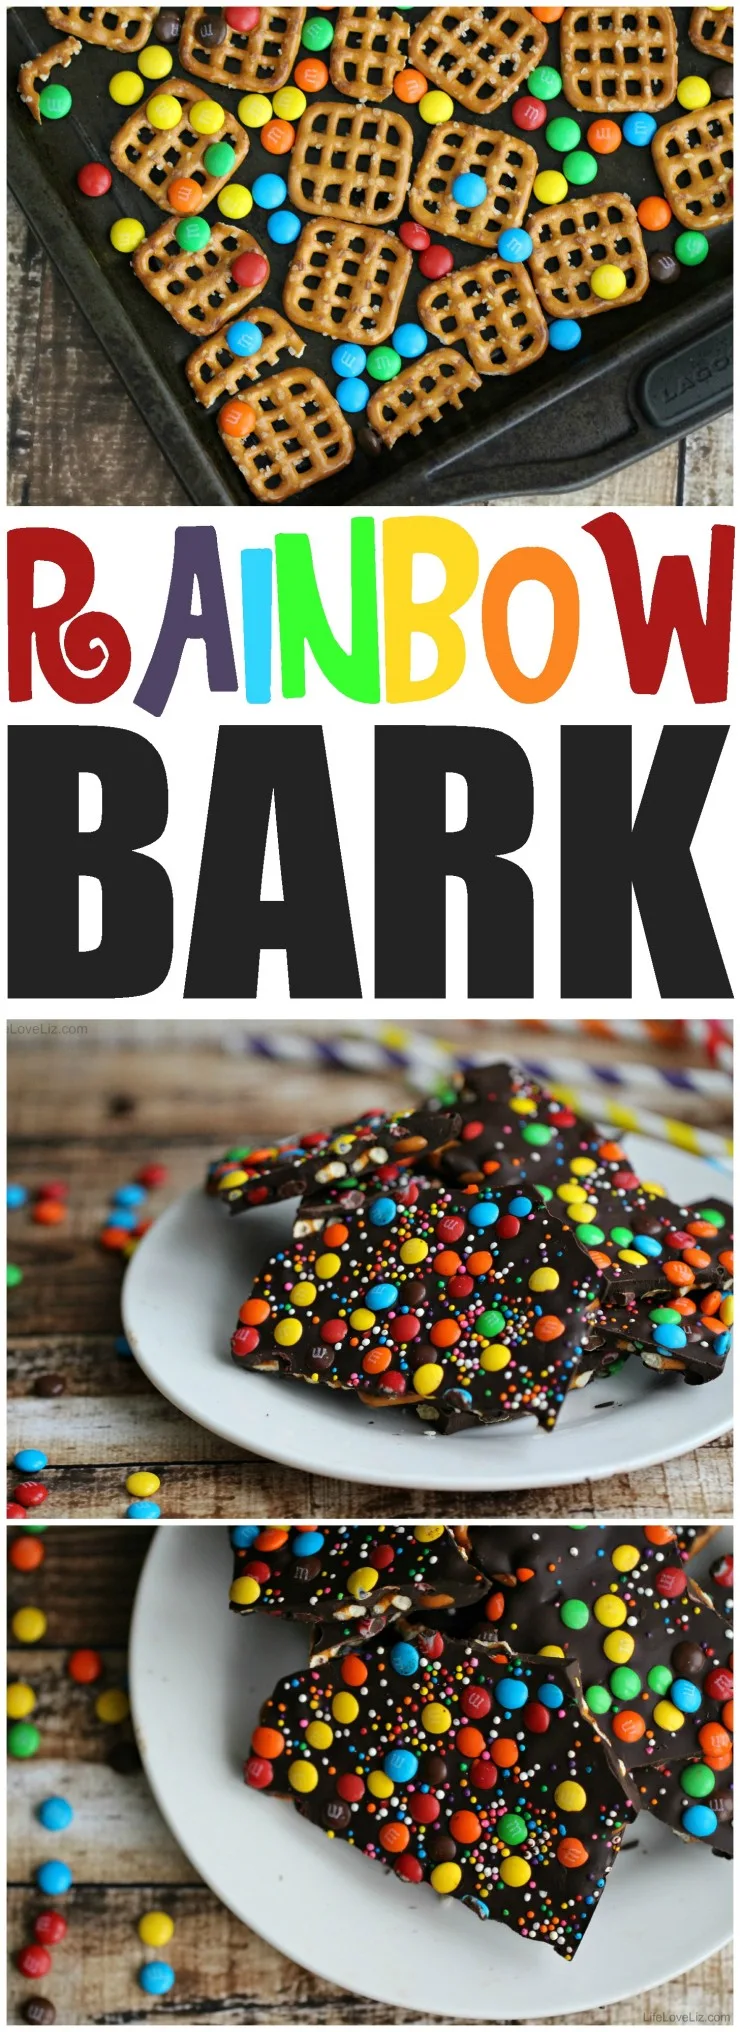 Rainbow Bark with Pretzels is a fun and tasty St. Patrick's Day dessert. It's sweet and salty in just the right way!